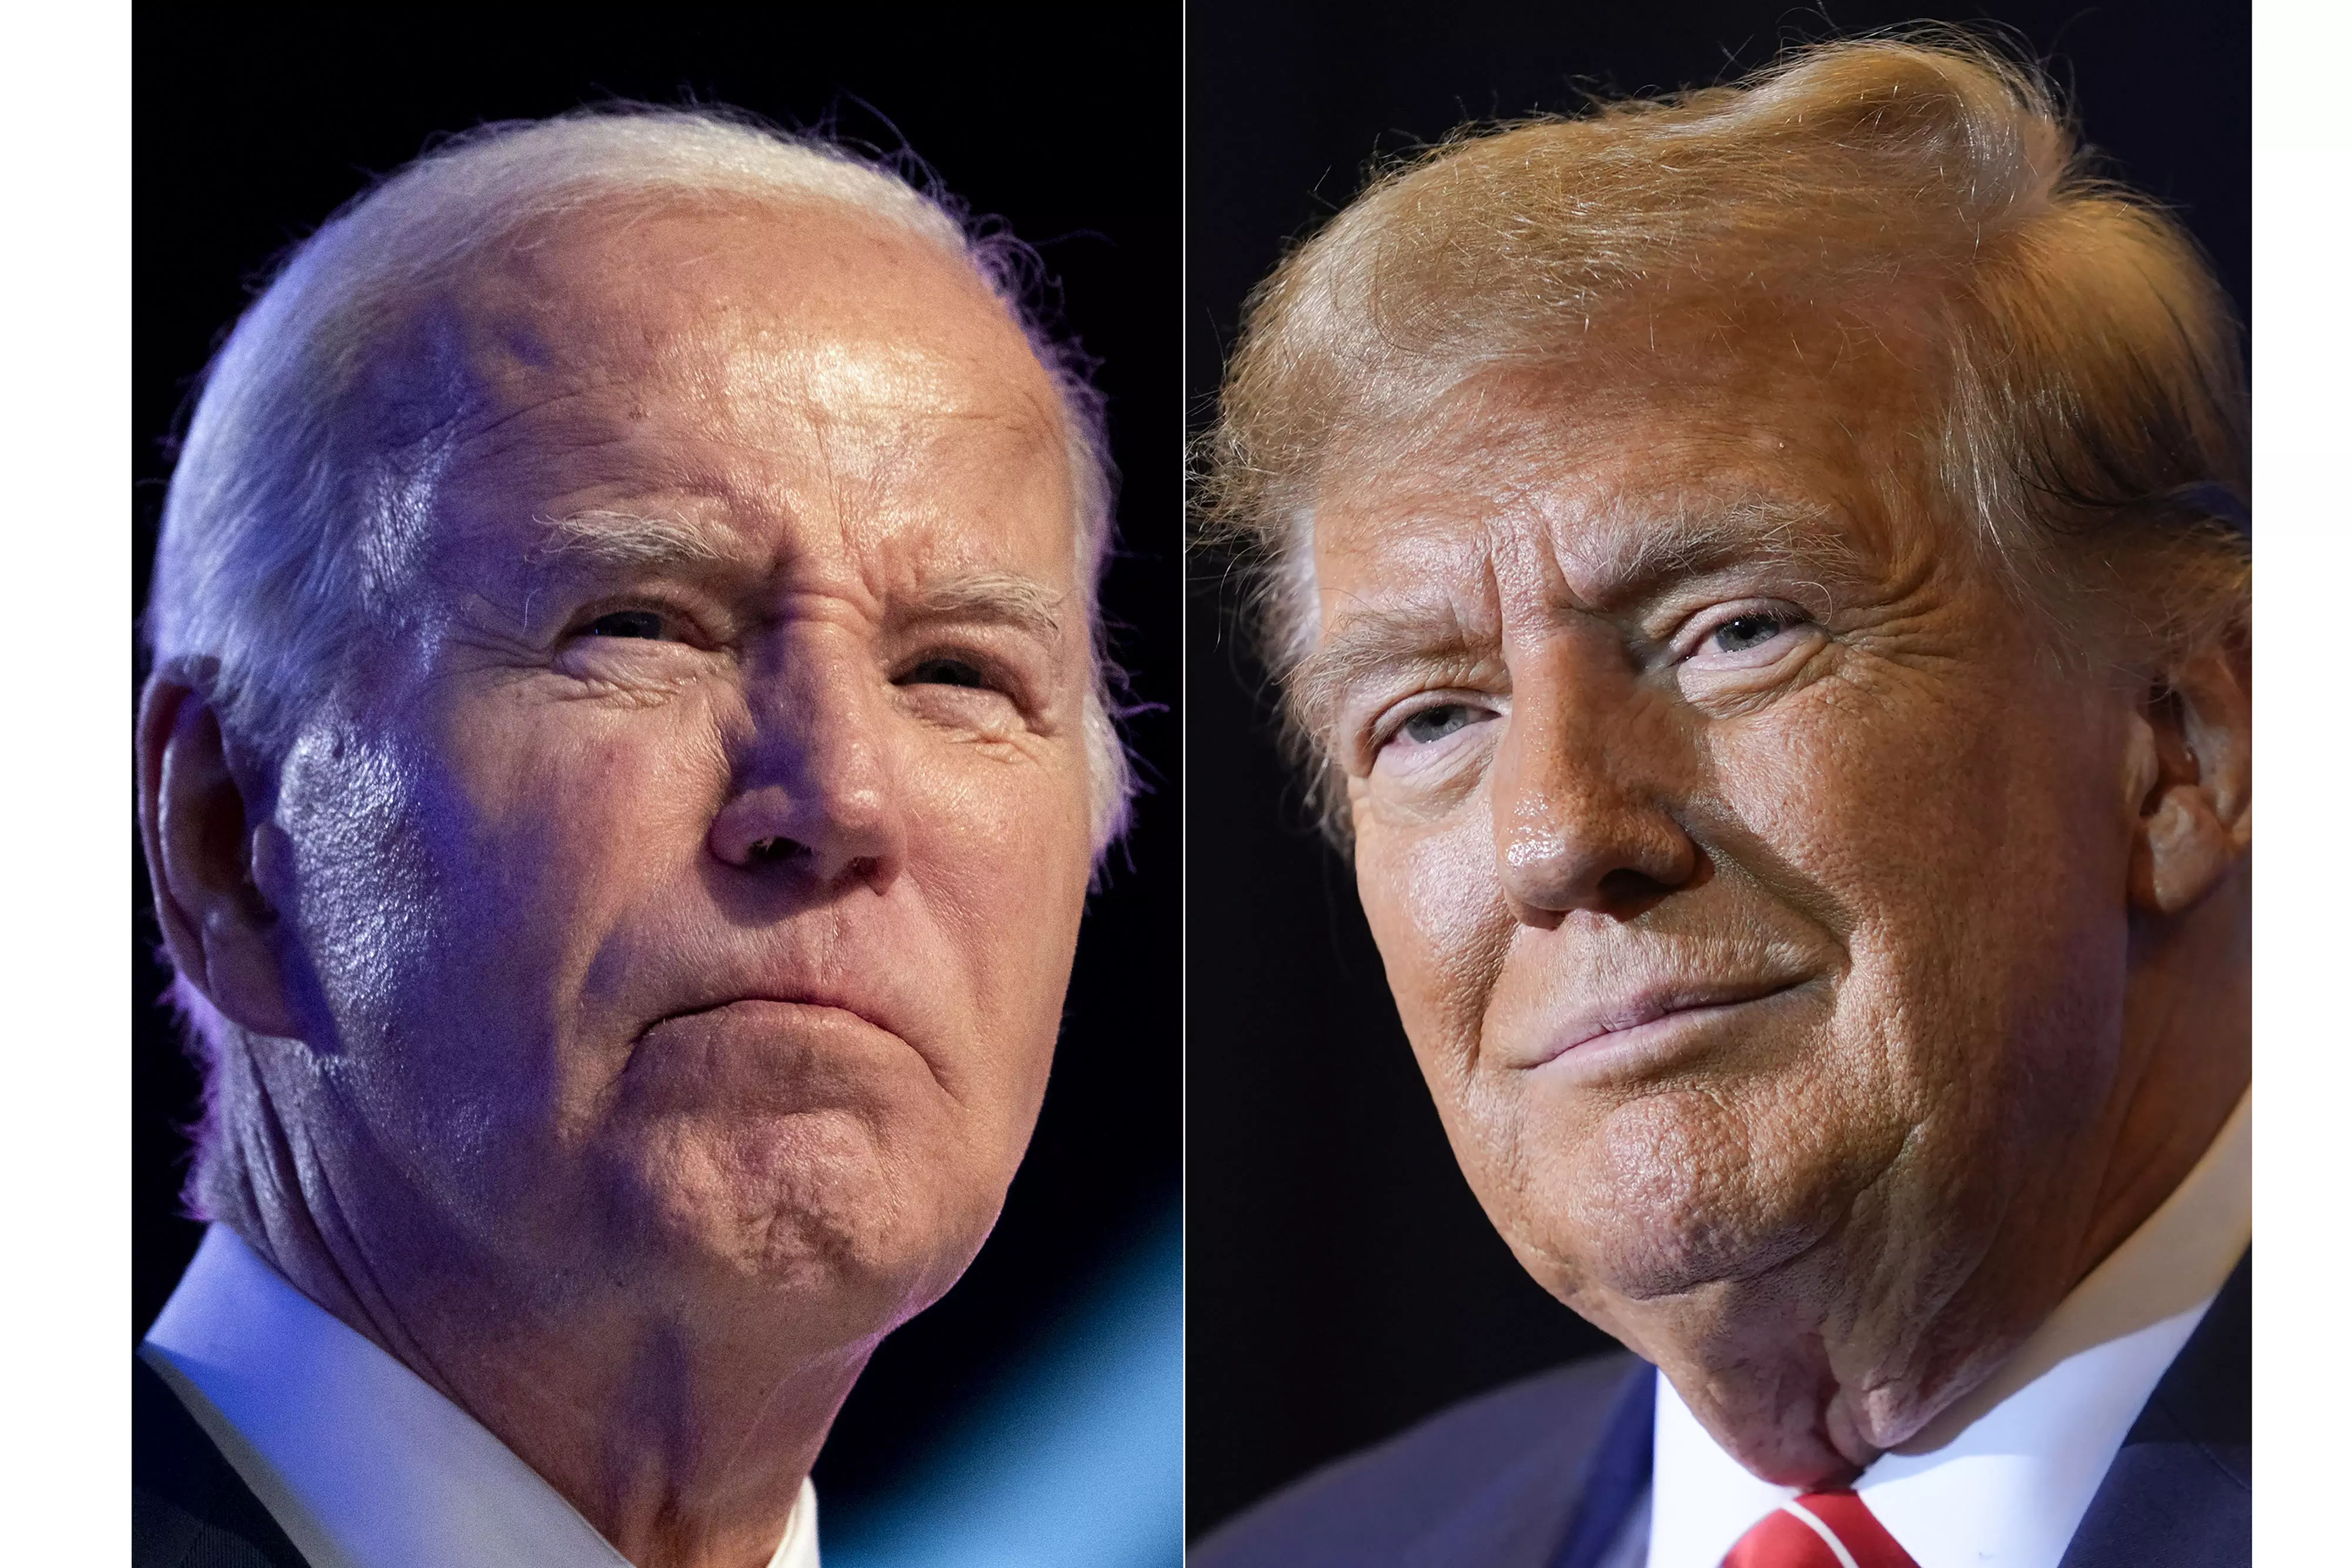 Biden clinches nominations as Presidential rematch with Trump looms